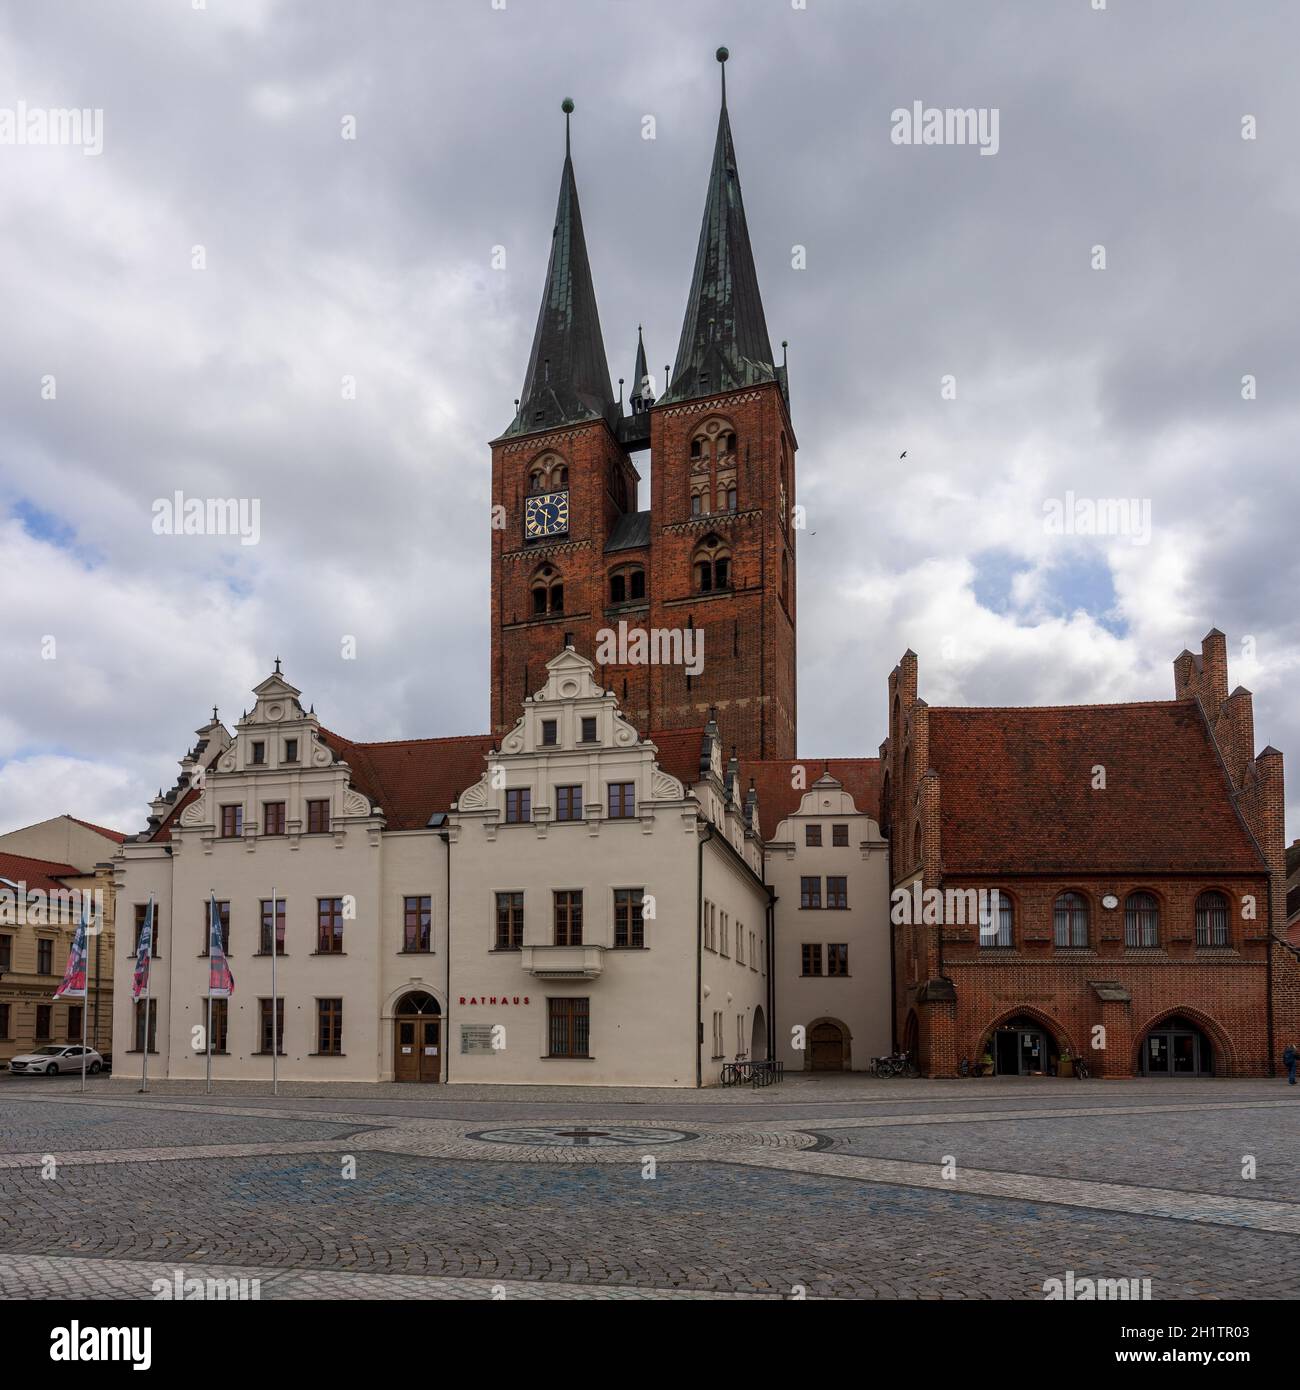 STENDAL, GERMANY - APRIL 24, 2021: Old town square and Town Hall. Hansestadt Stendal is a medieval town in Saxony-Anhalt state. Stock Photo